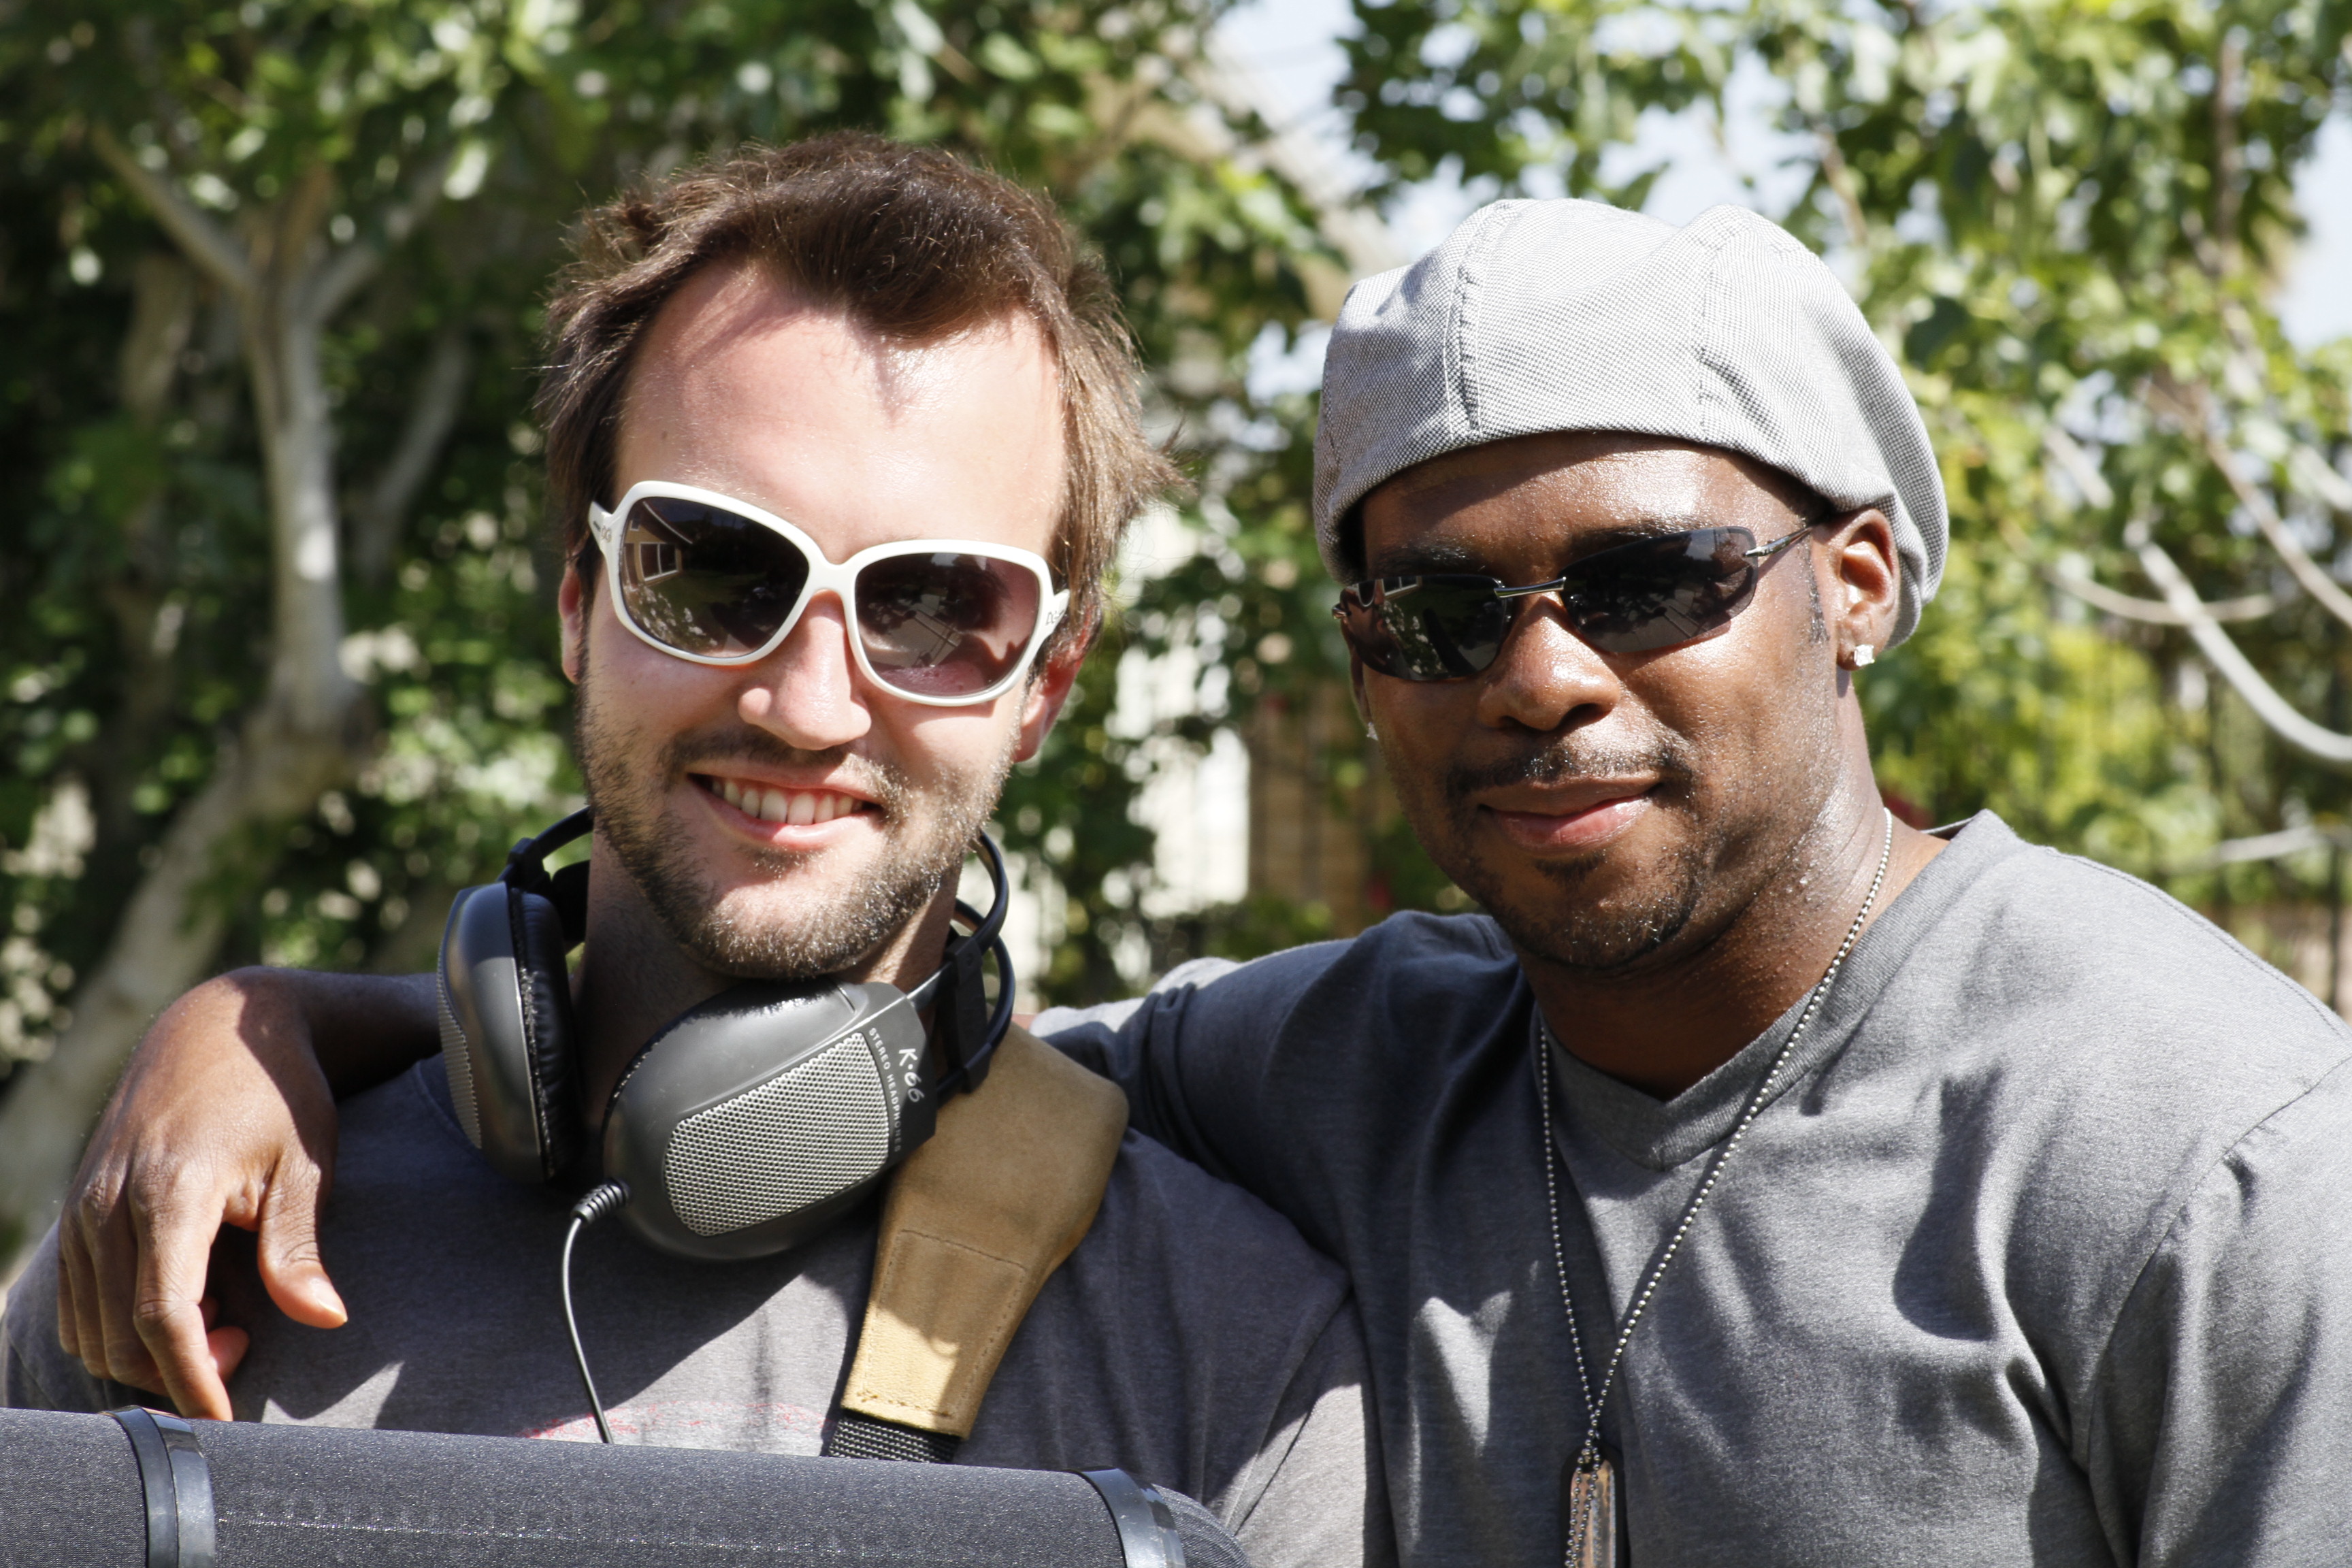 Maurice hanging with soundguy Jordan on the set of 